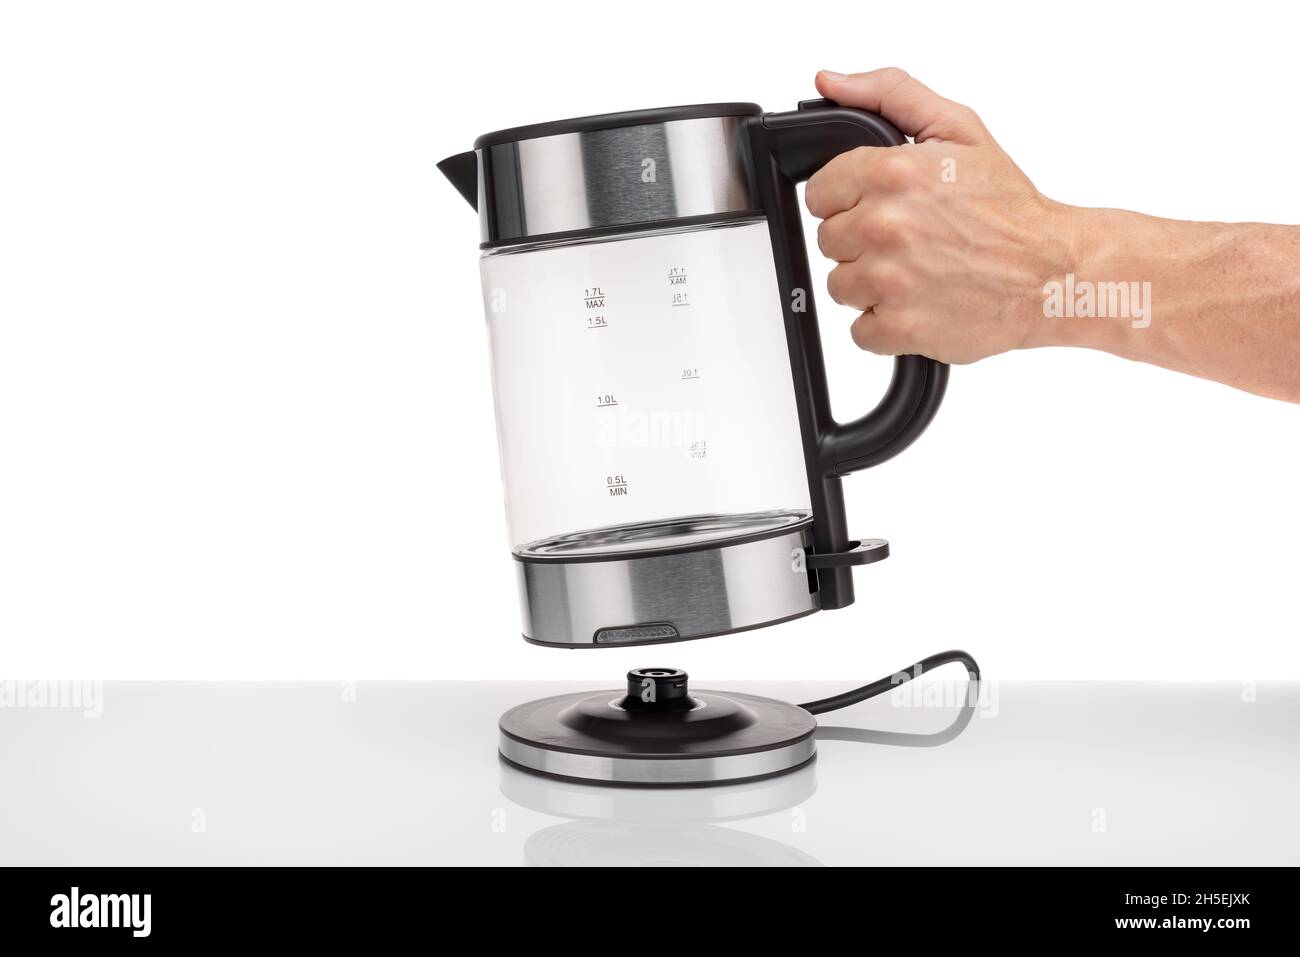 https://c8.alamy.com/comp/2H5EJXK/a-hand-holds-a-glass-electric-modern-transparent-kettle-on-a-white-background-close-up-2H5EJXK.jpg